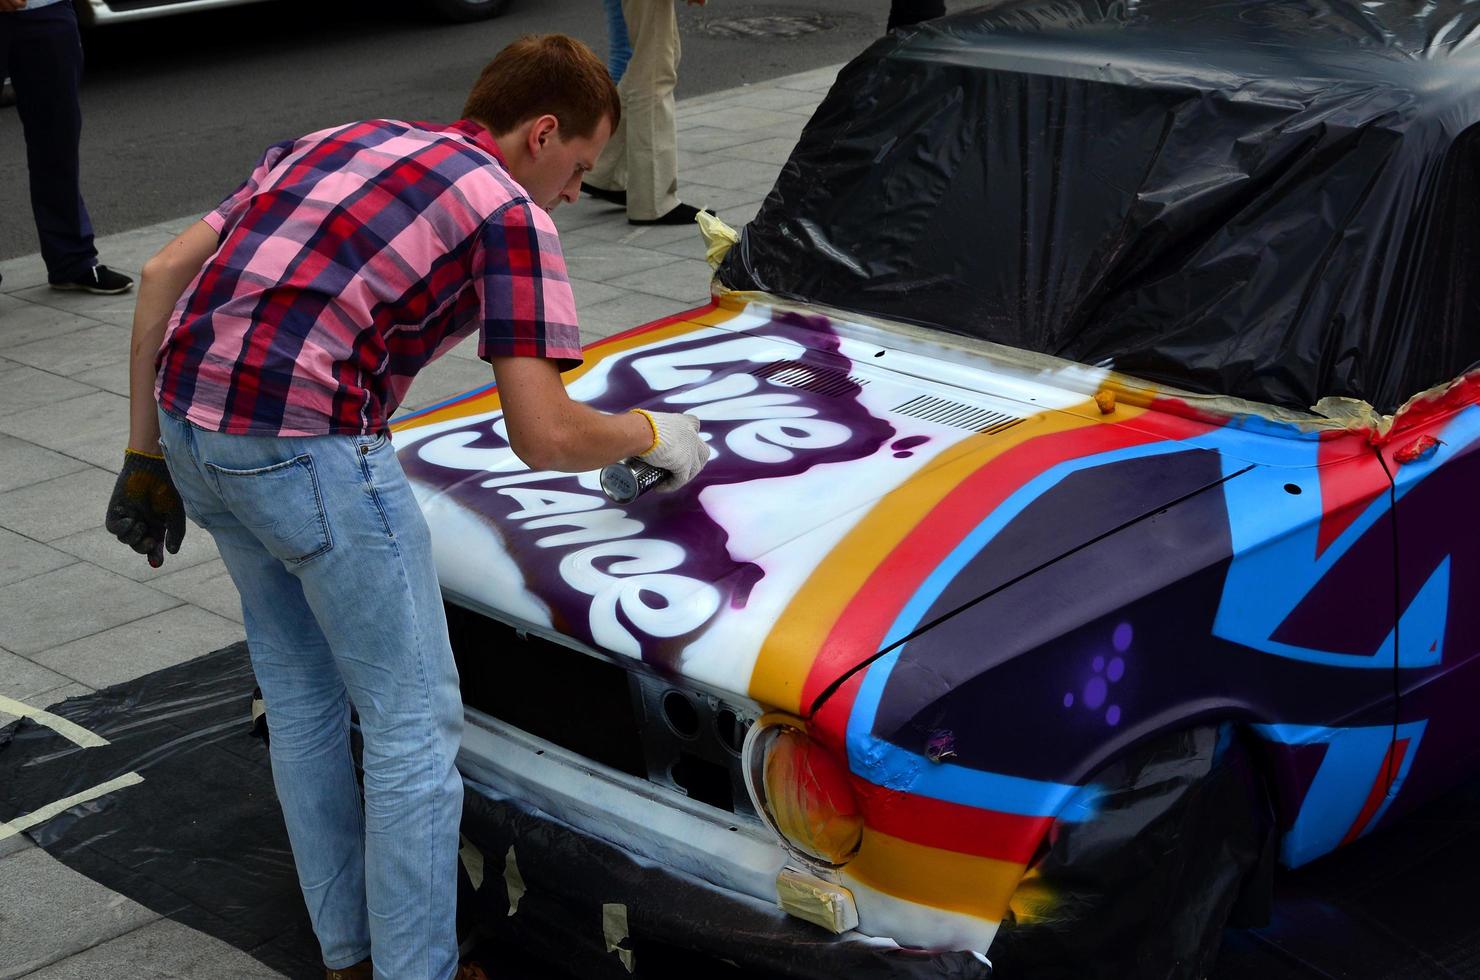 KHARKOV, UKRAINE - MAY 27, 2017 Festival of street art. Young guys draw graffiti on the car body in the city center. The process of drawing color graffiti on a car with aerosol cans photo